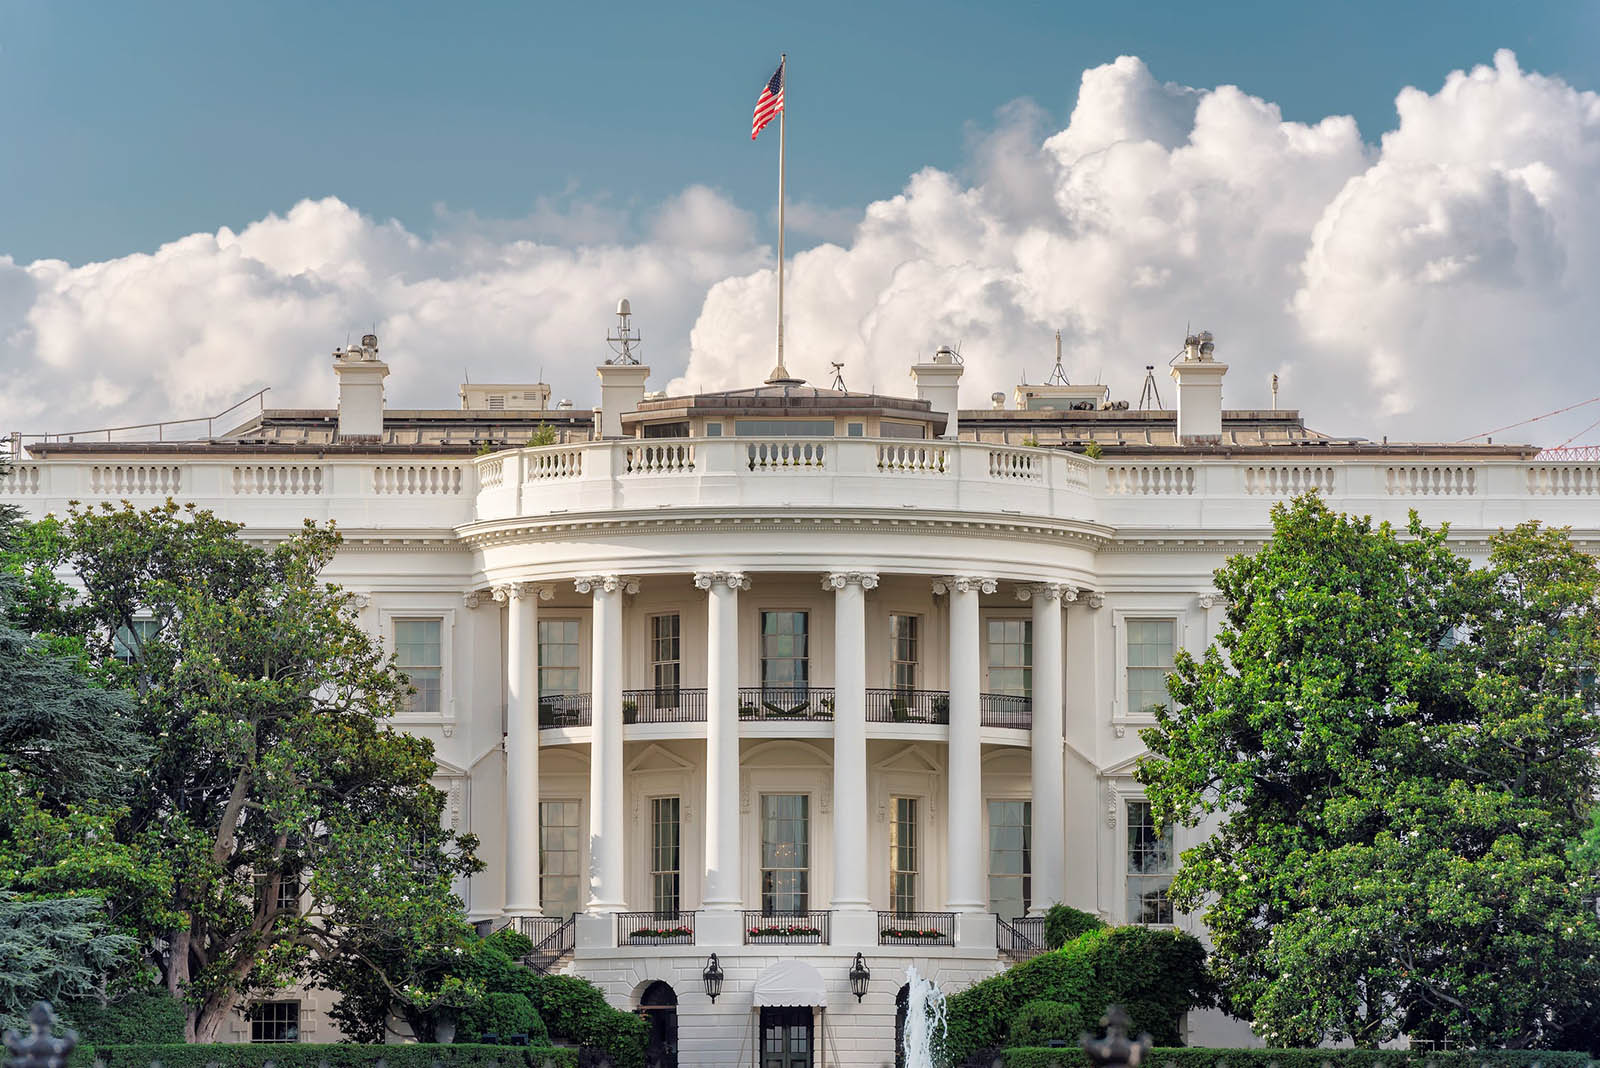 Most People Can’t Get More Than 10/15 on This Random Knowledge Quiz White House, Washington, D.C., United States